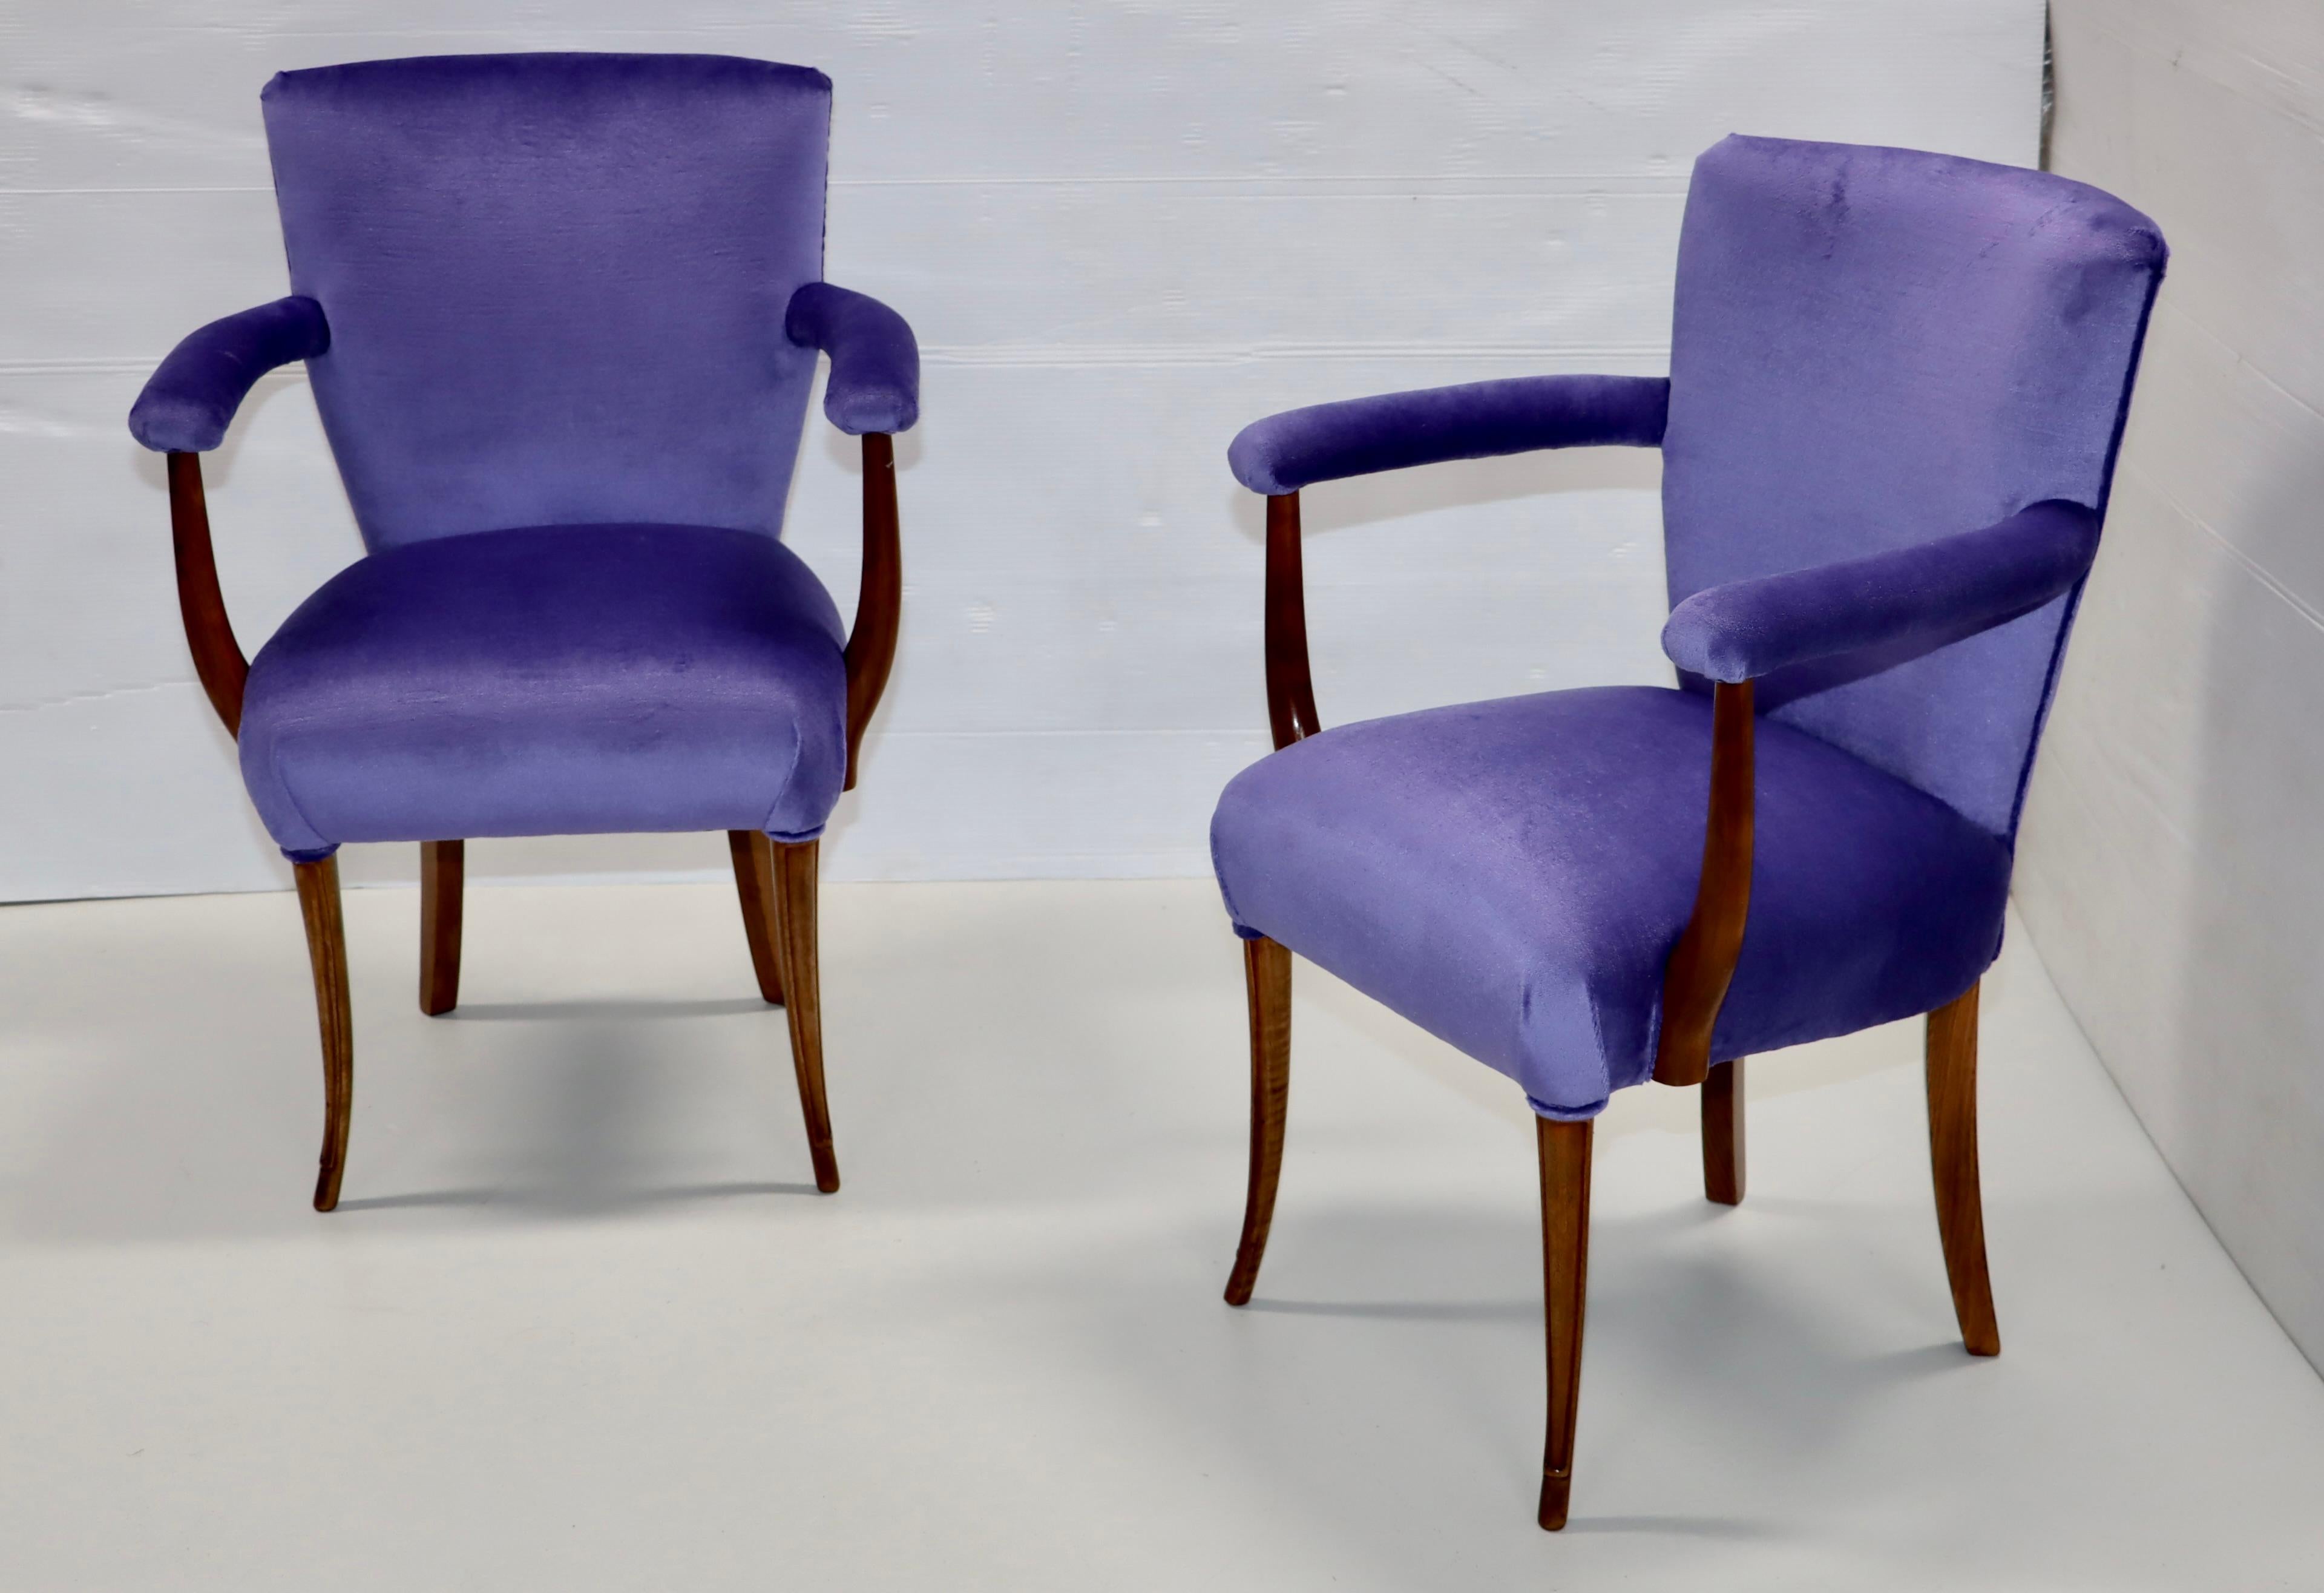 1950's mid-century modern French walnut side chairs with mohair upholstery, newly re-upholstered Mohair fabric, with minor wear and patina due to age and use.